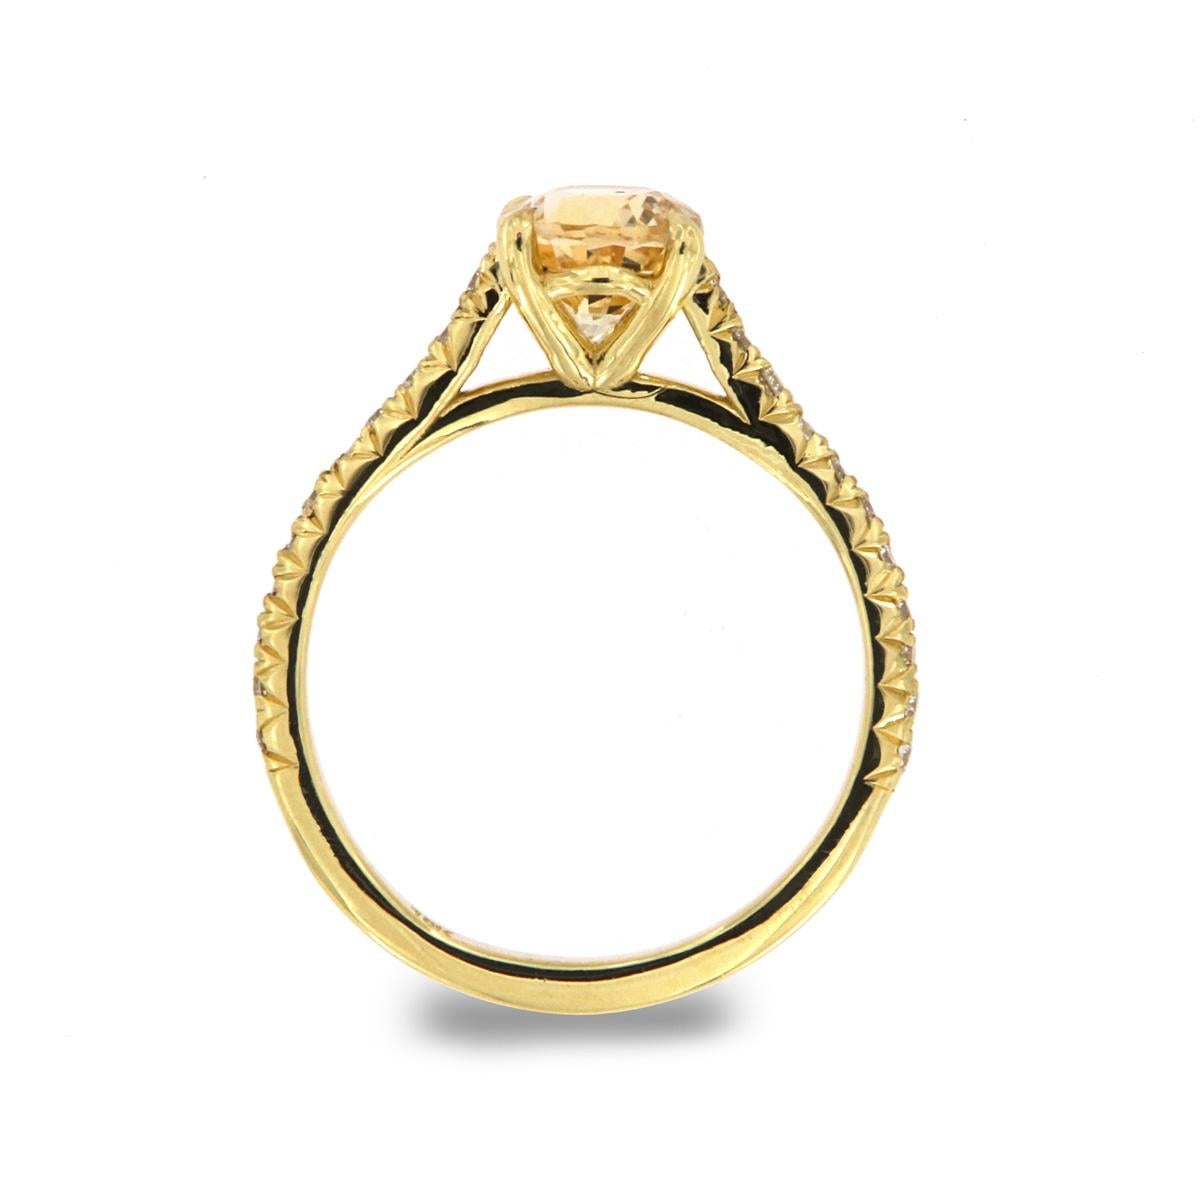 French Pave set diamonds in three-fourths of the band in this petit ring centering a 1.40 carat Yellow Sapphire.

Product details: 

Center Gemstone Type: Yellow Sapphire
Center Gemstone Carat Weight: 1.4
Center Gemstone Diameter: 6.3MM
Center